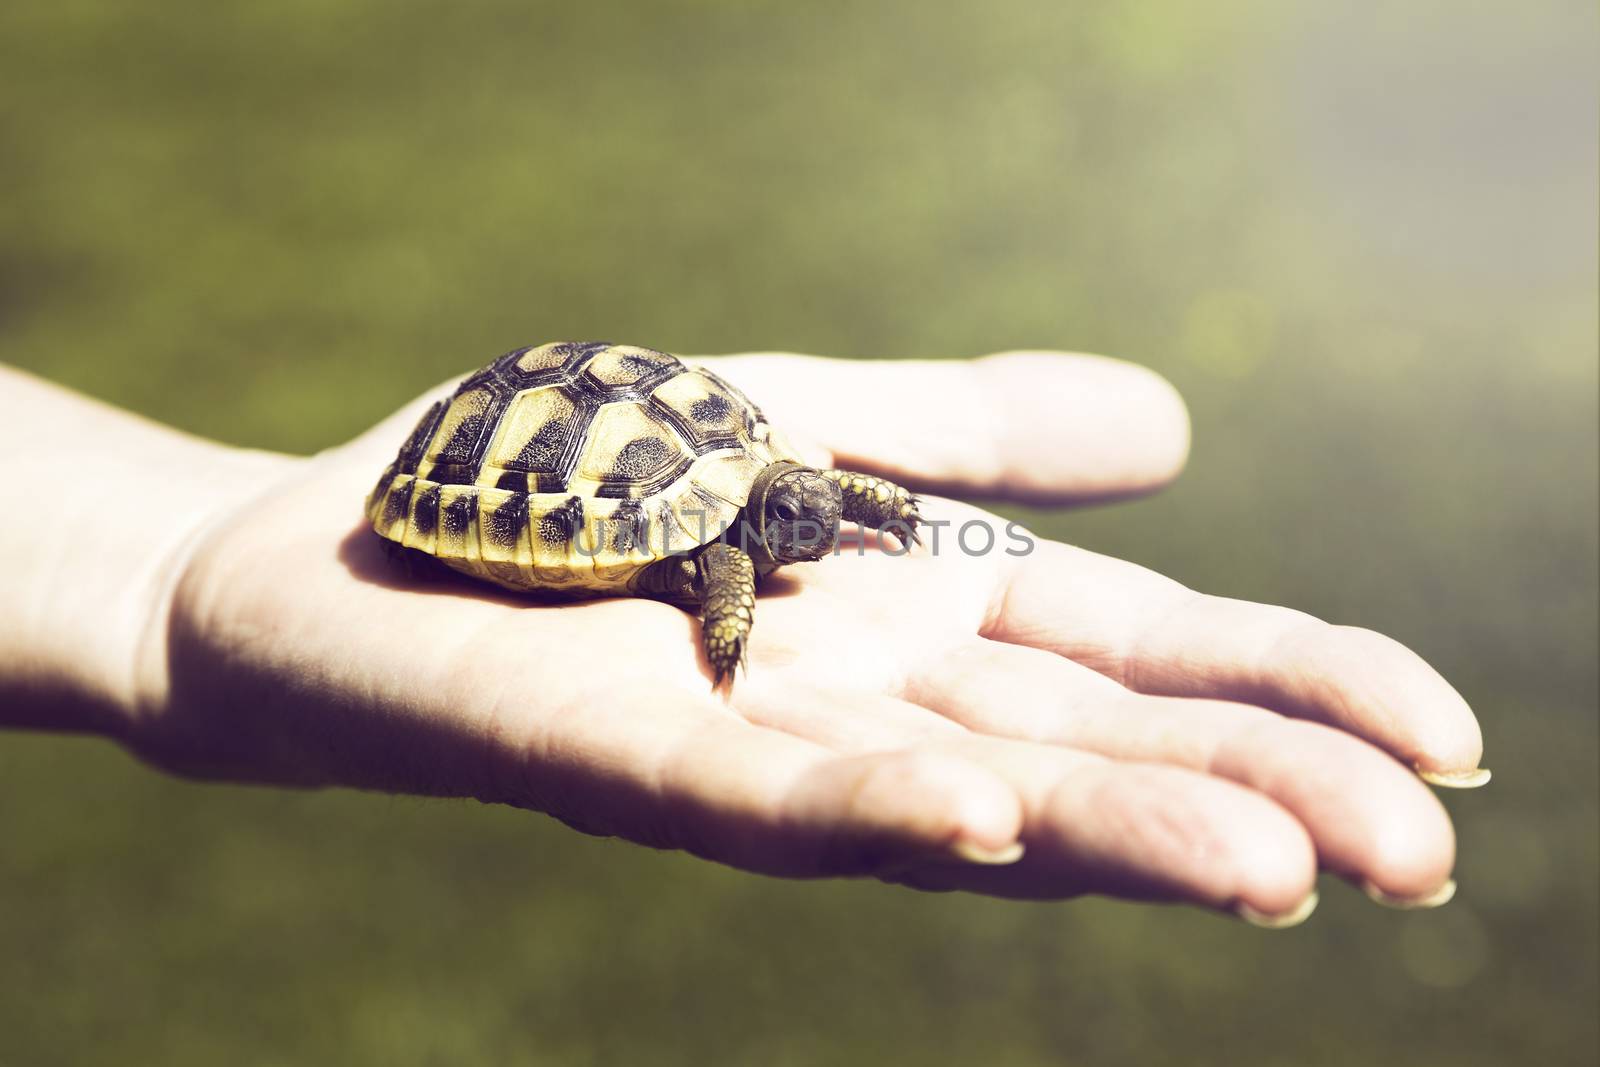 Small turtle in the palm of hand